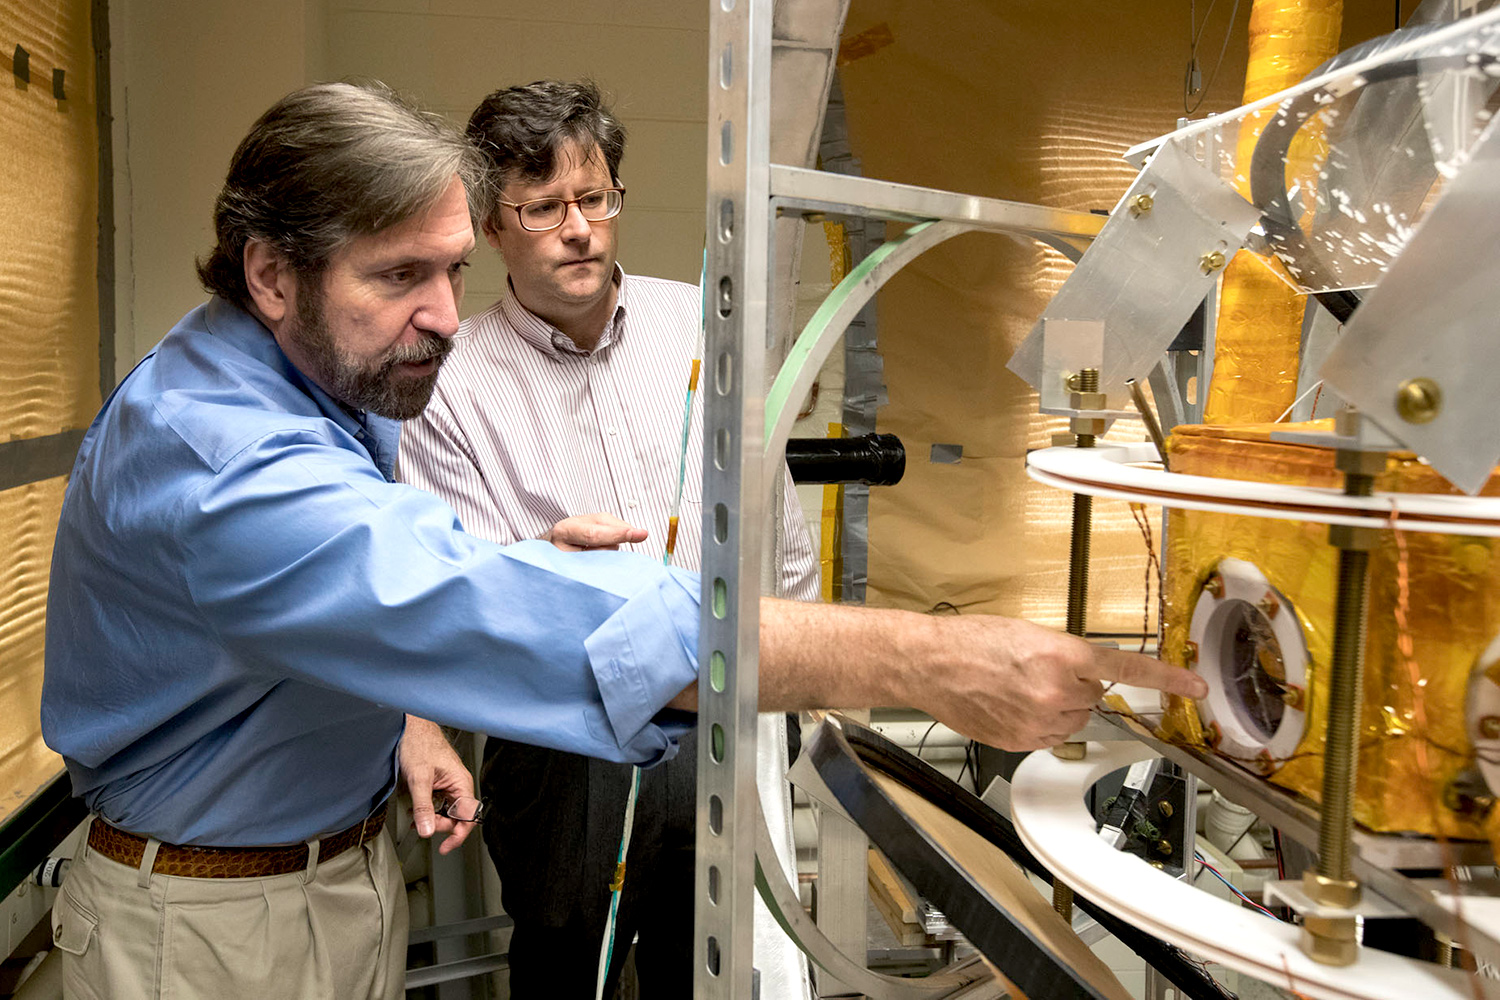 Gordon Cates and Wilson Miller with the unique imaging apparatus they built in their lab.